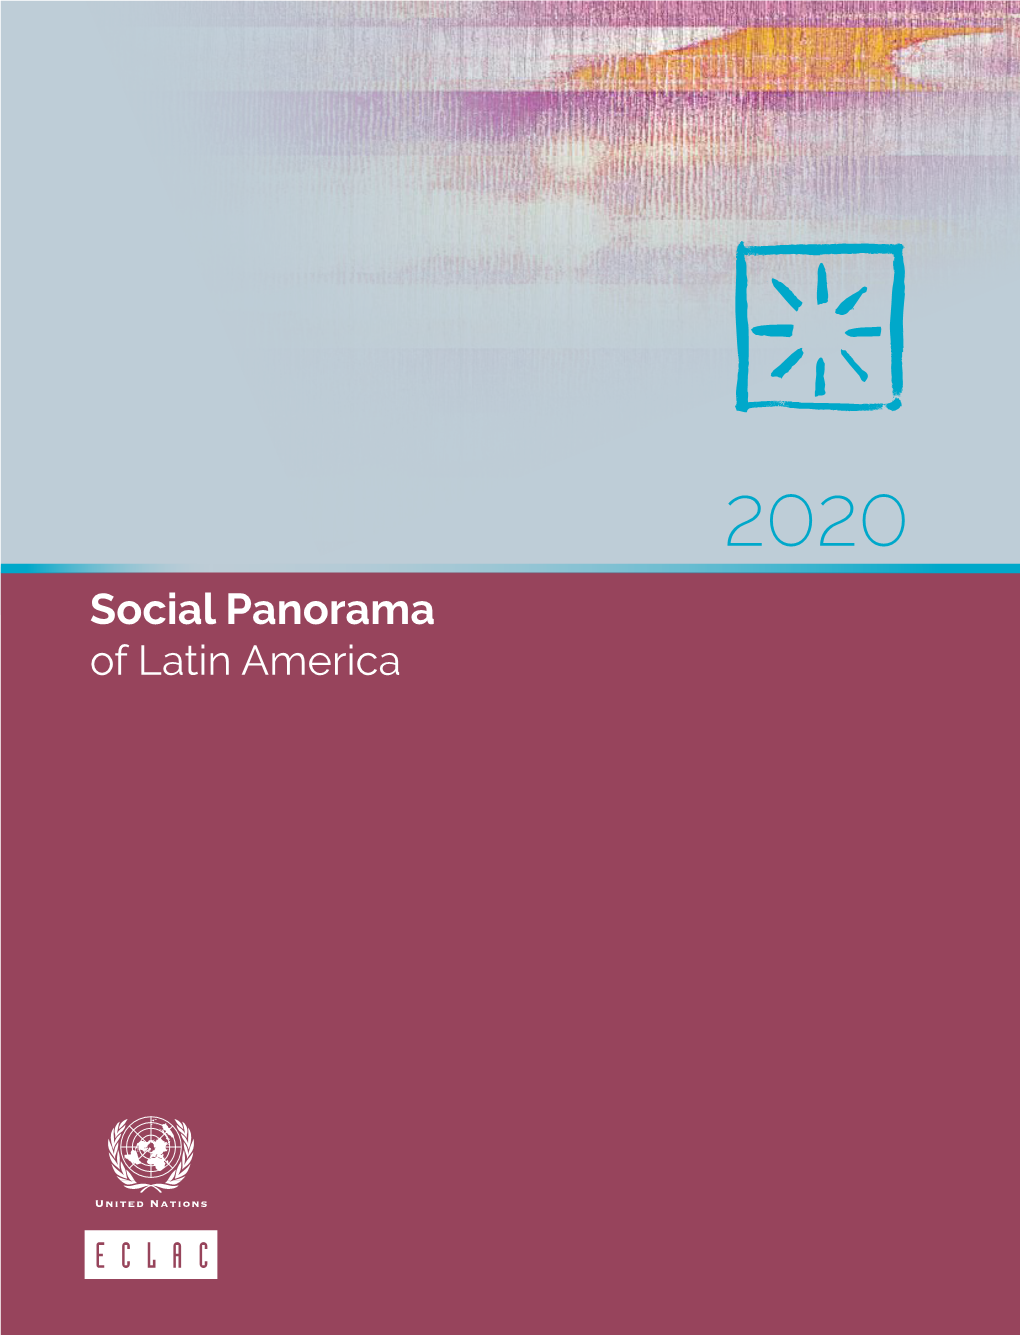 Social Panorama of Latin America Thank You for Your Interest in This ECLAC Publication